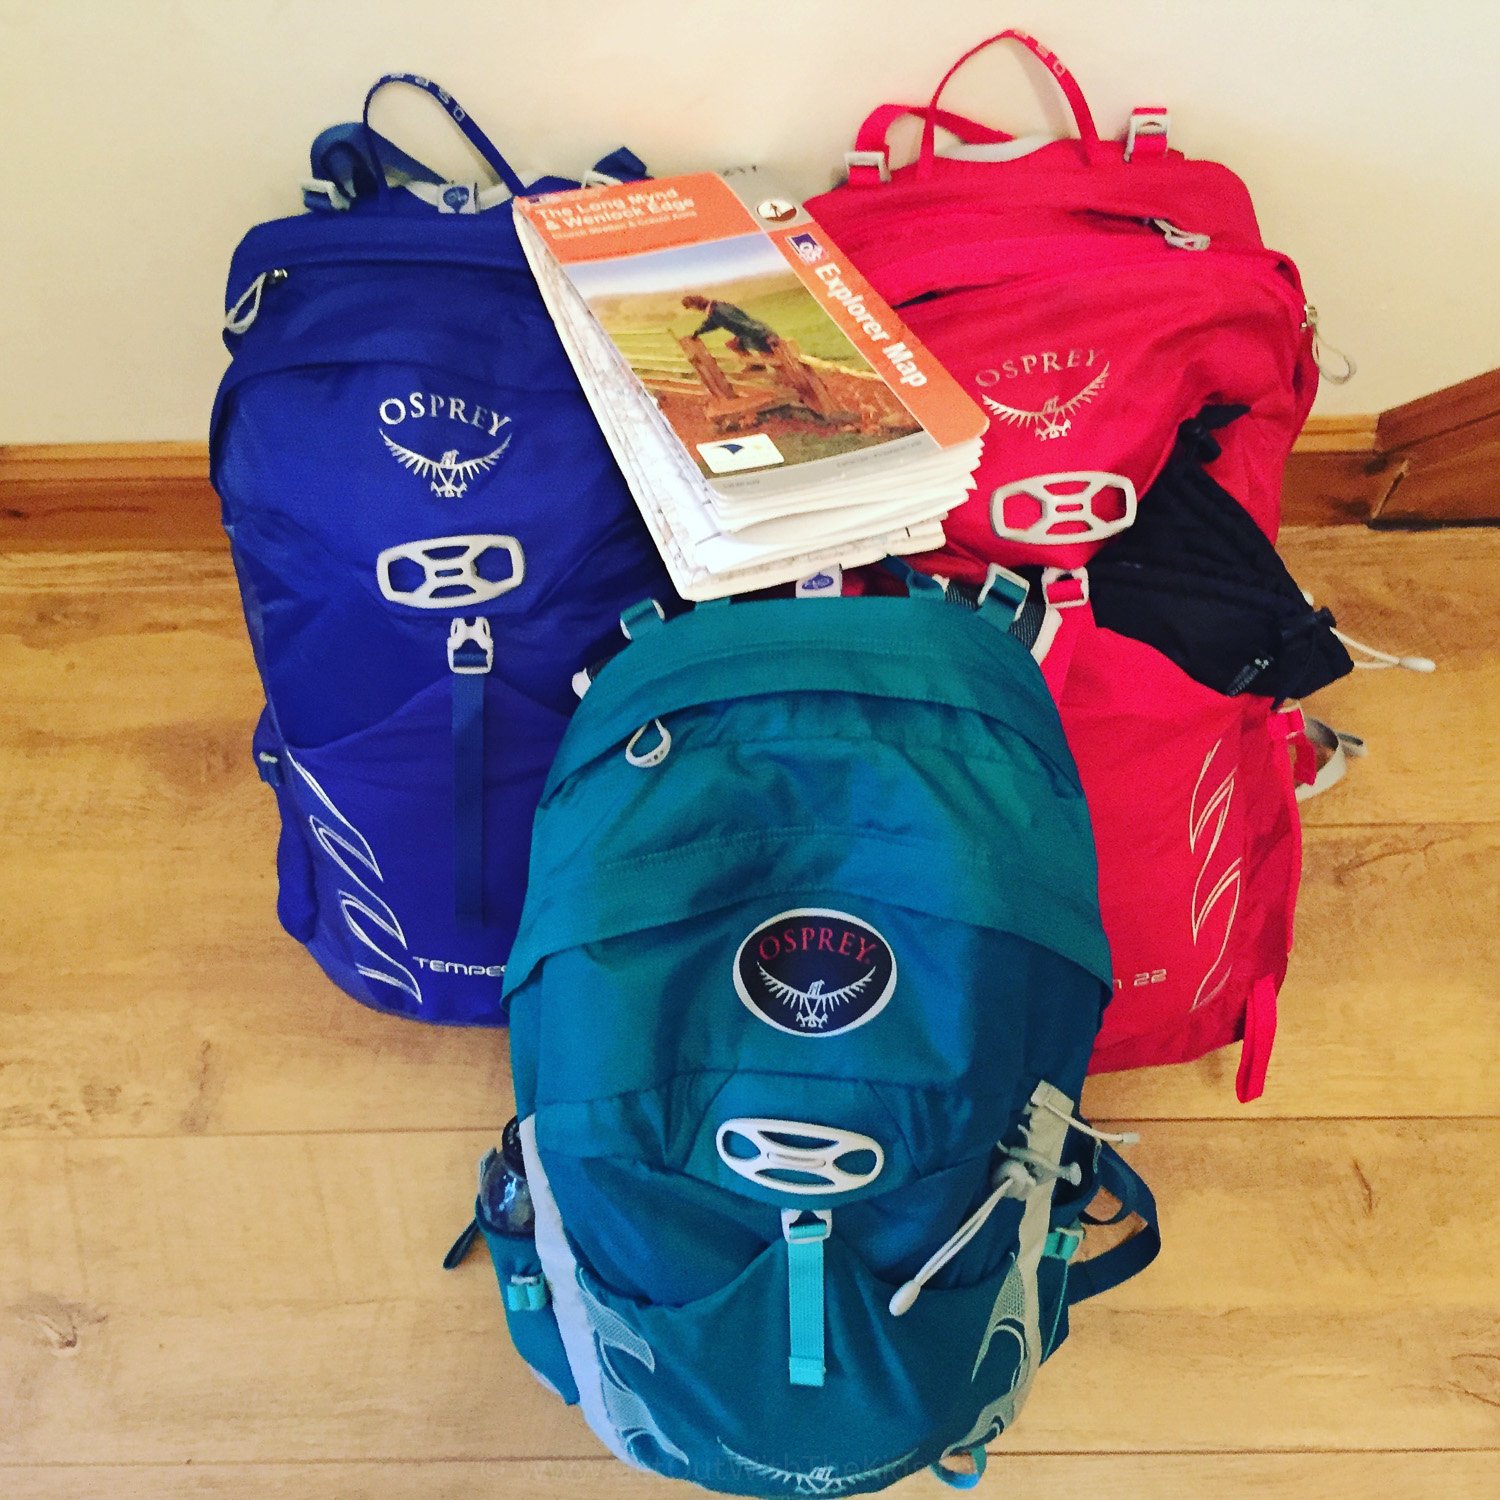 The Osprey bags ready for the day's adventure